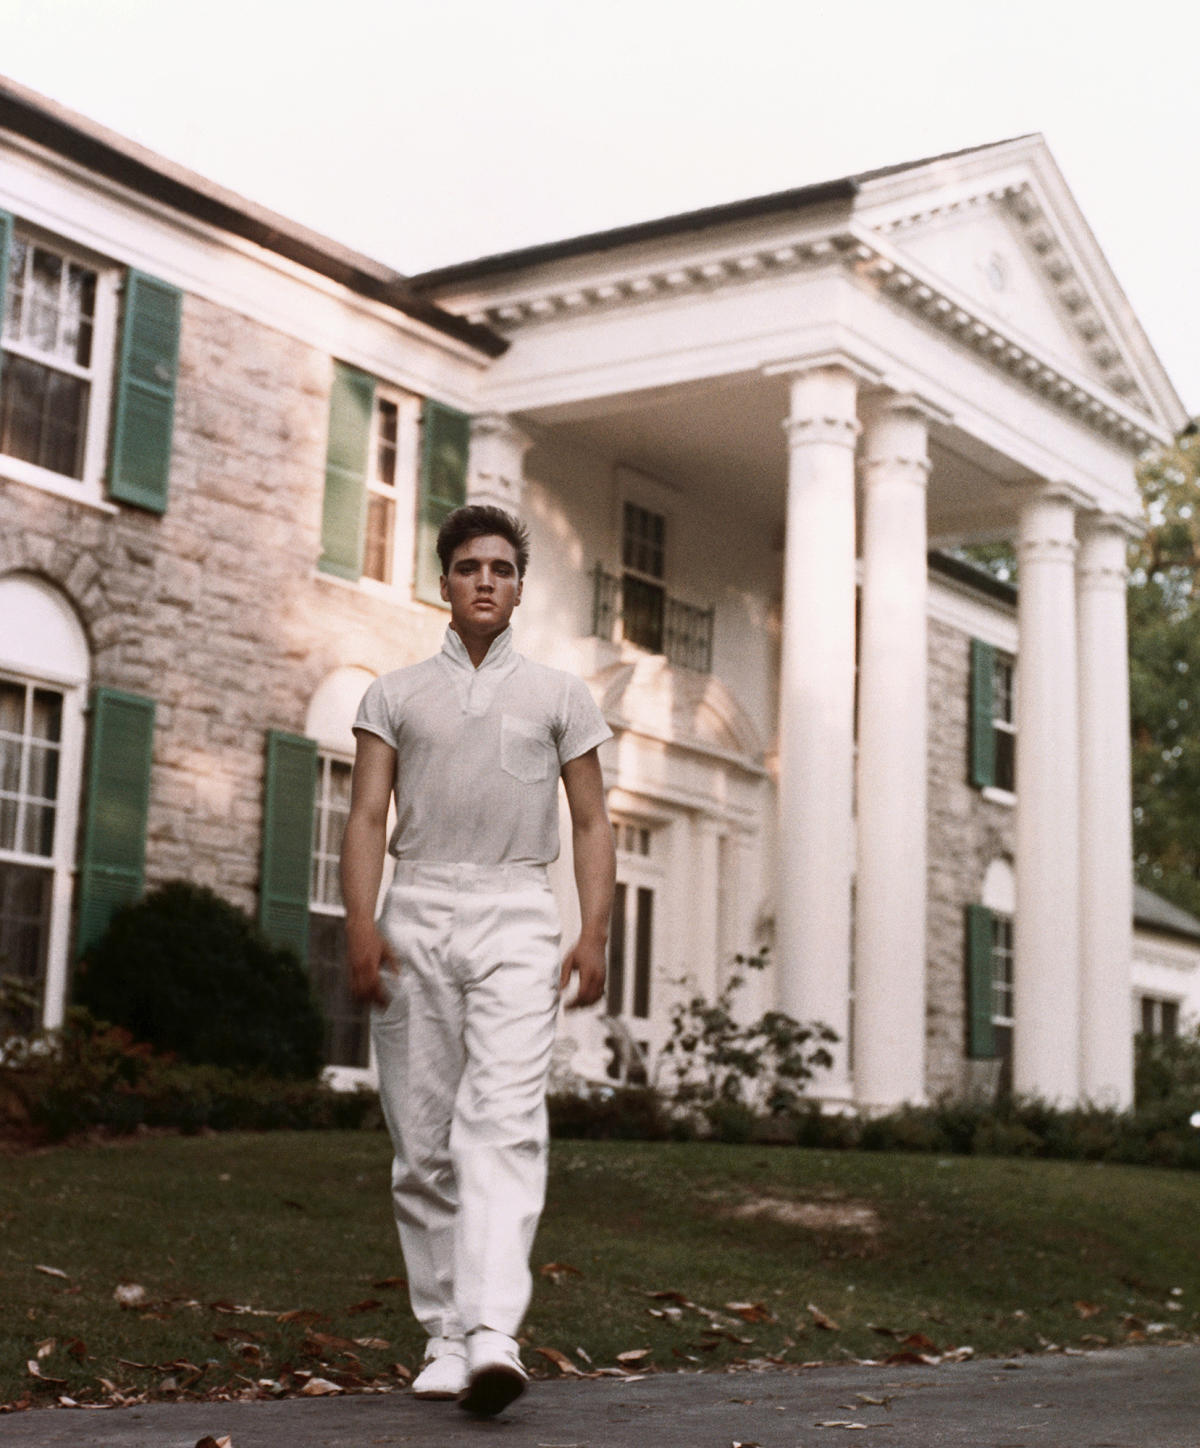 Elvis Presley S Graceland 10 Things You Didn T Know About The King Of Rock S Legendary Home